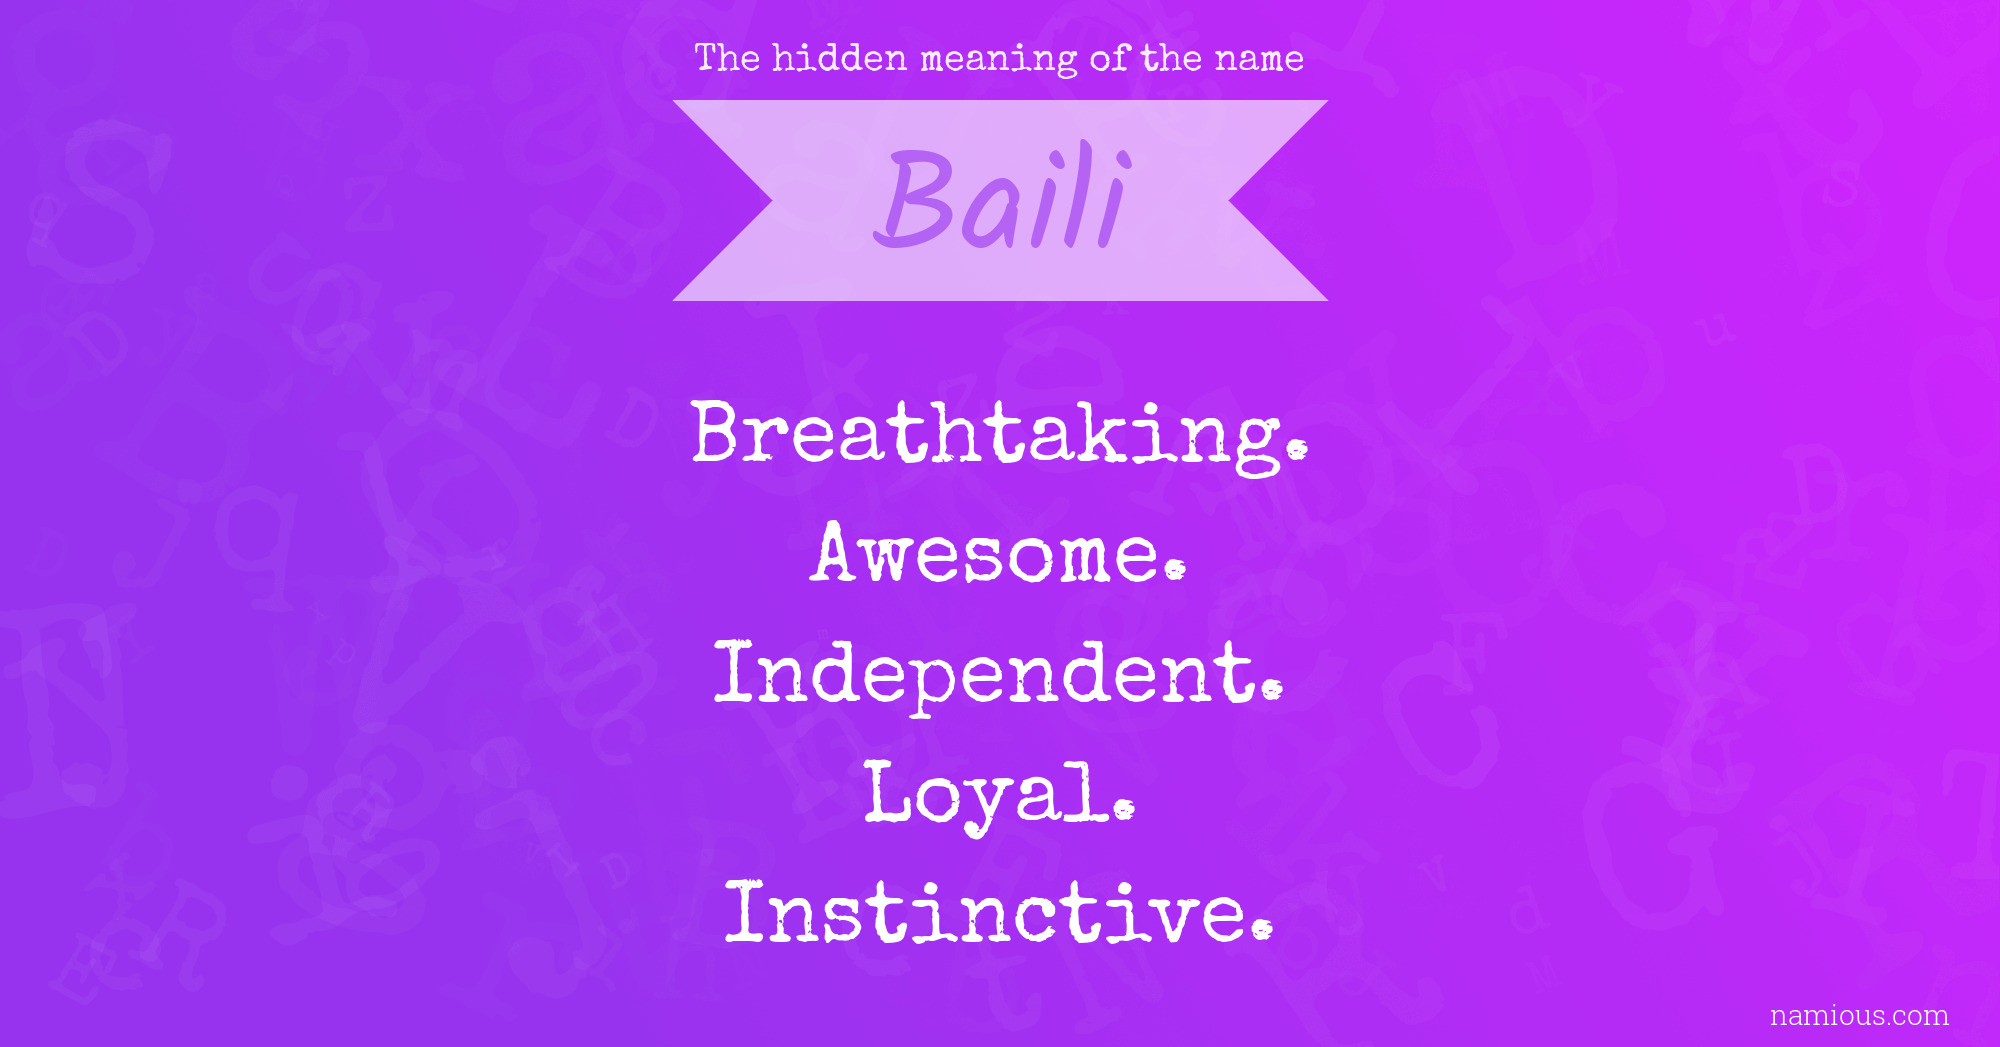 The hidden meaning of the name Baili